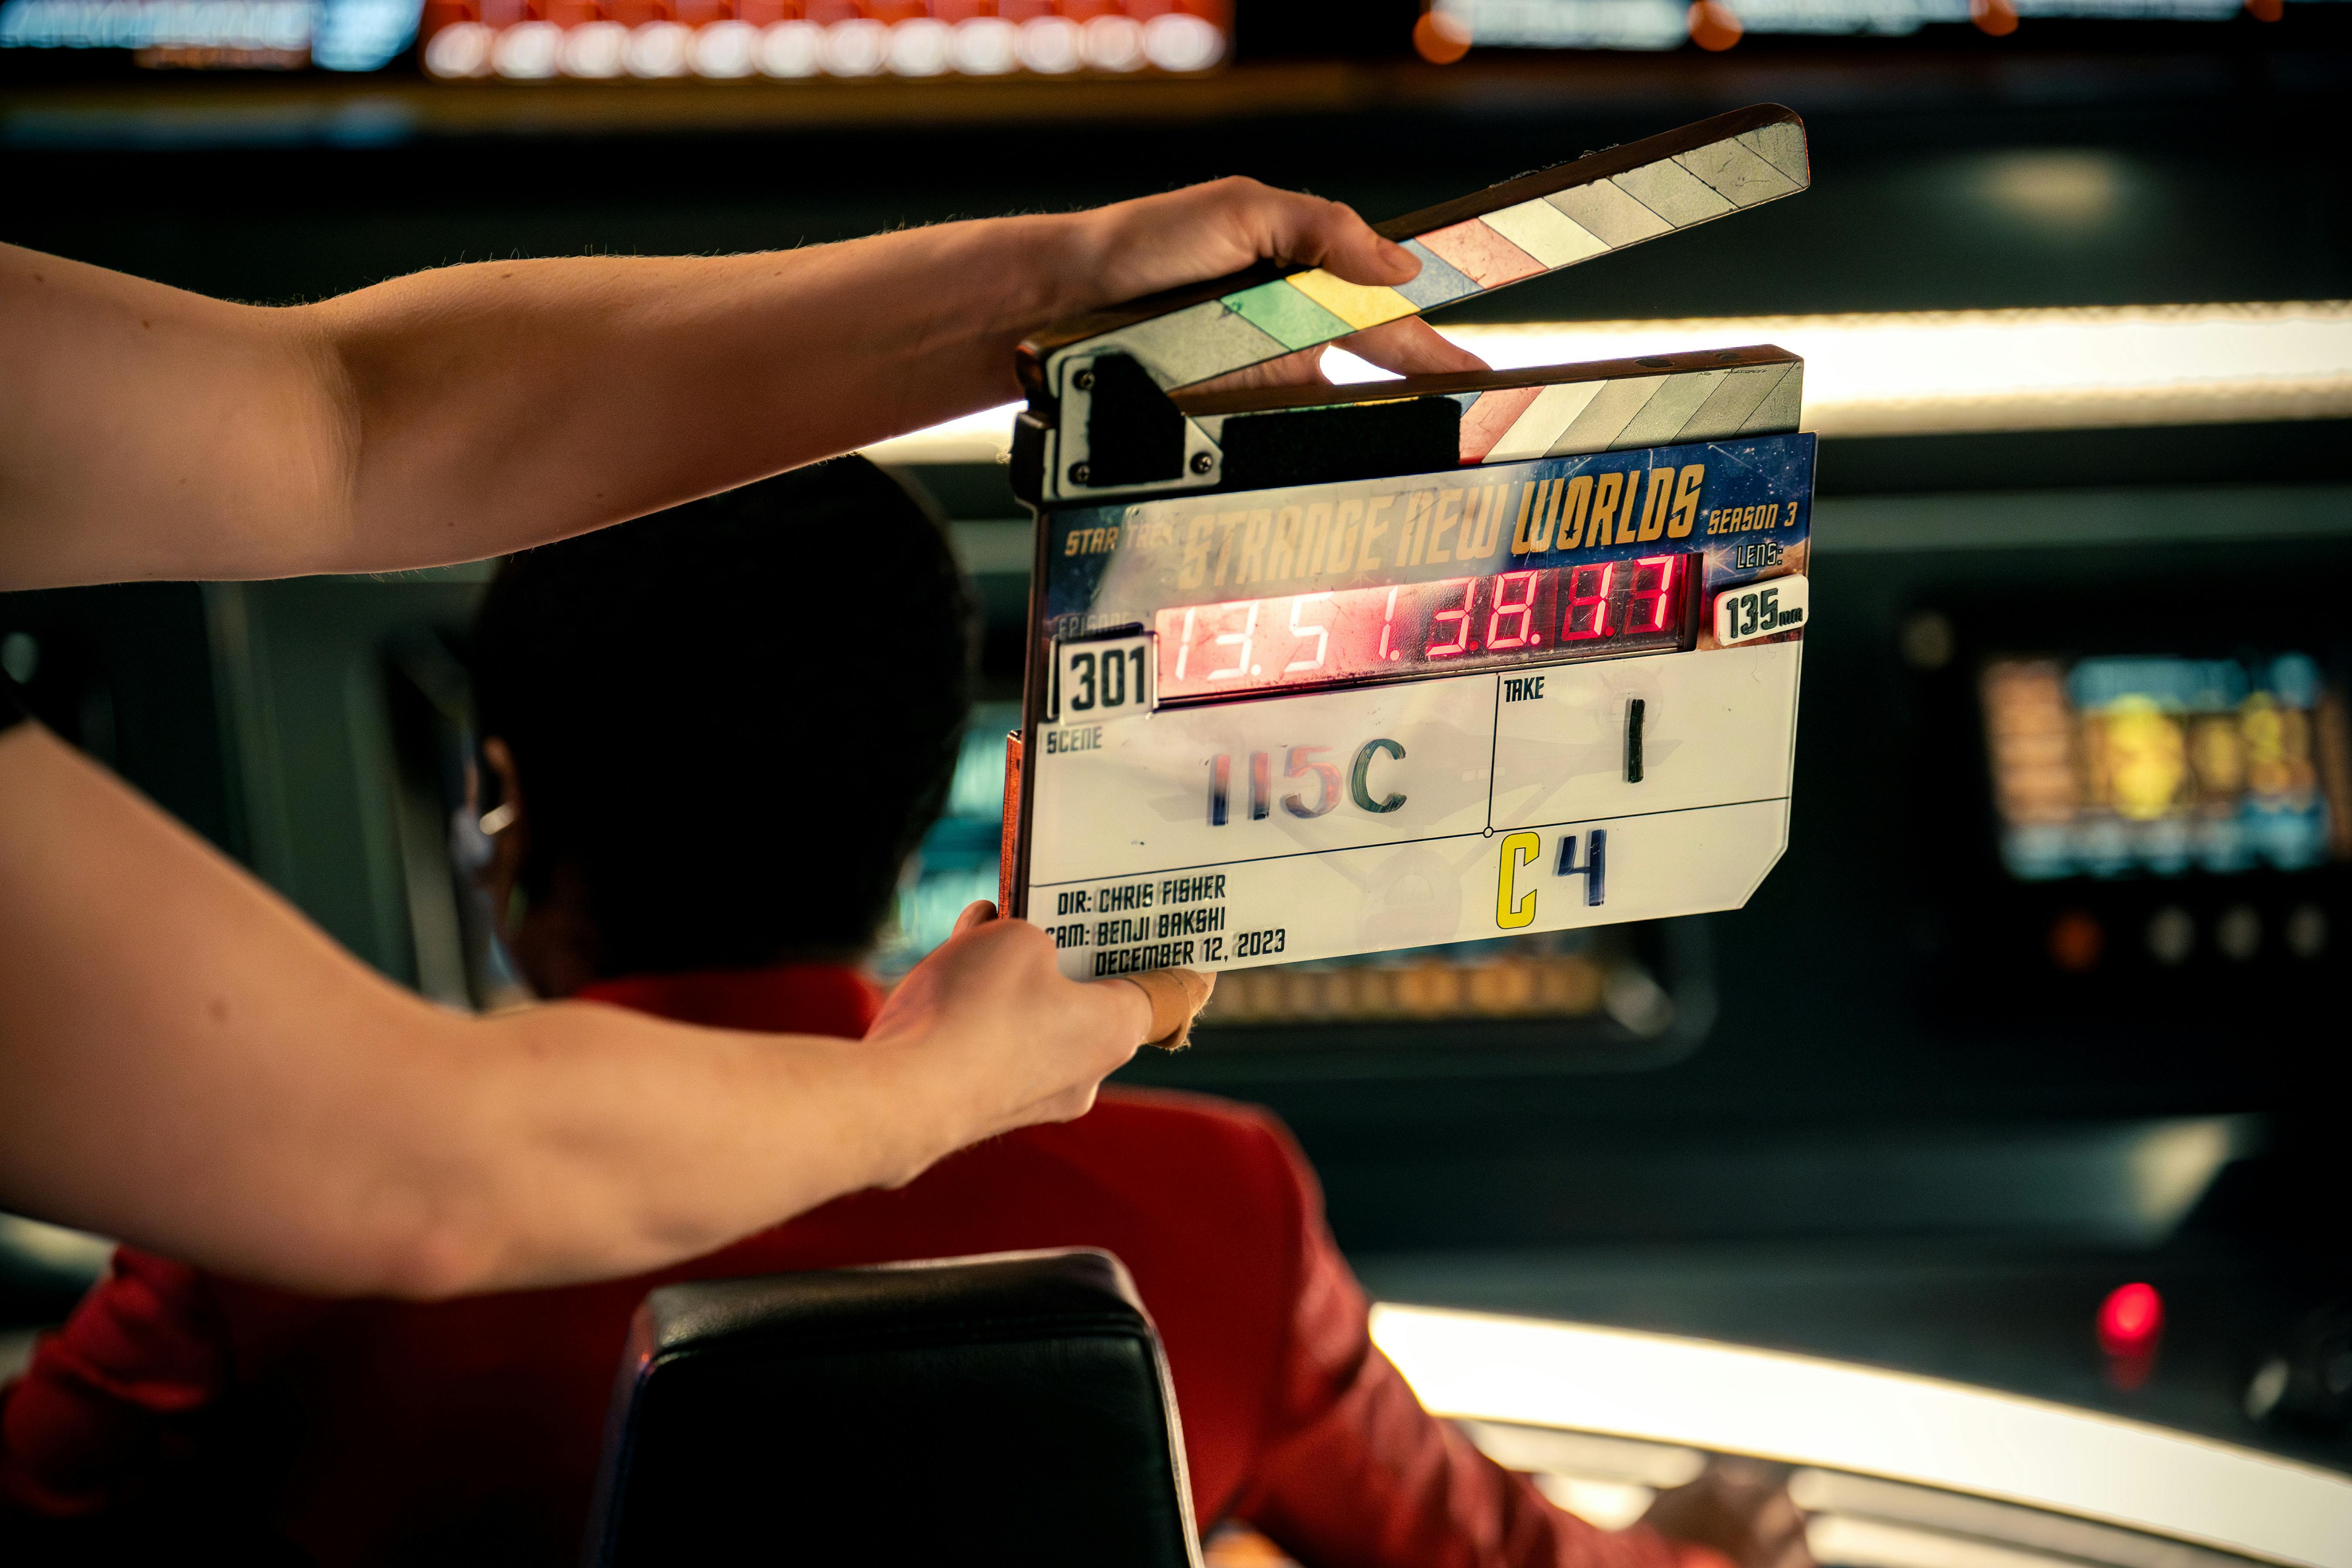 Behind-the-scenes production capture of a clapboard for Season 3, Episode 1 of Star Trek: Strange New Worlds with Celia Rose Gooding sitting at Uhura's station on the Enterprise bridge